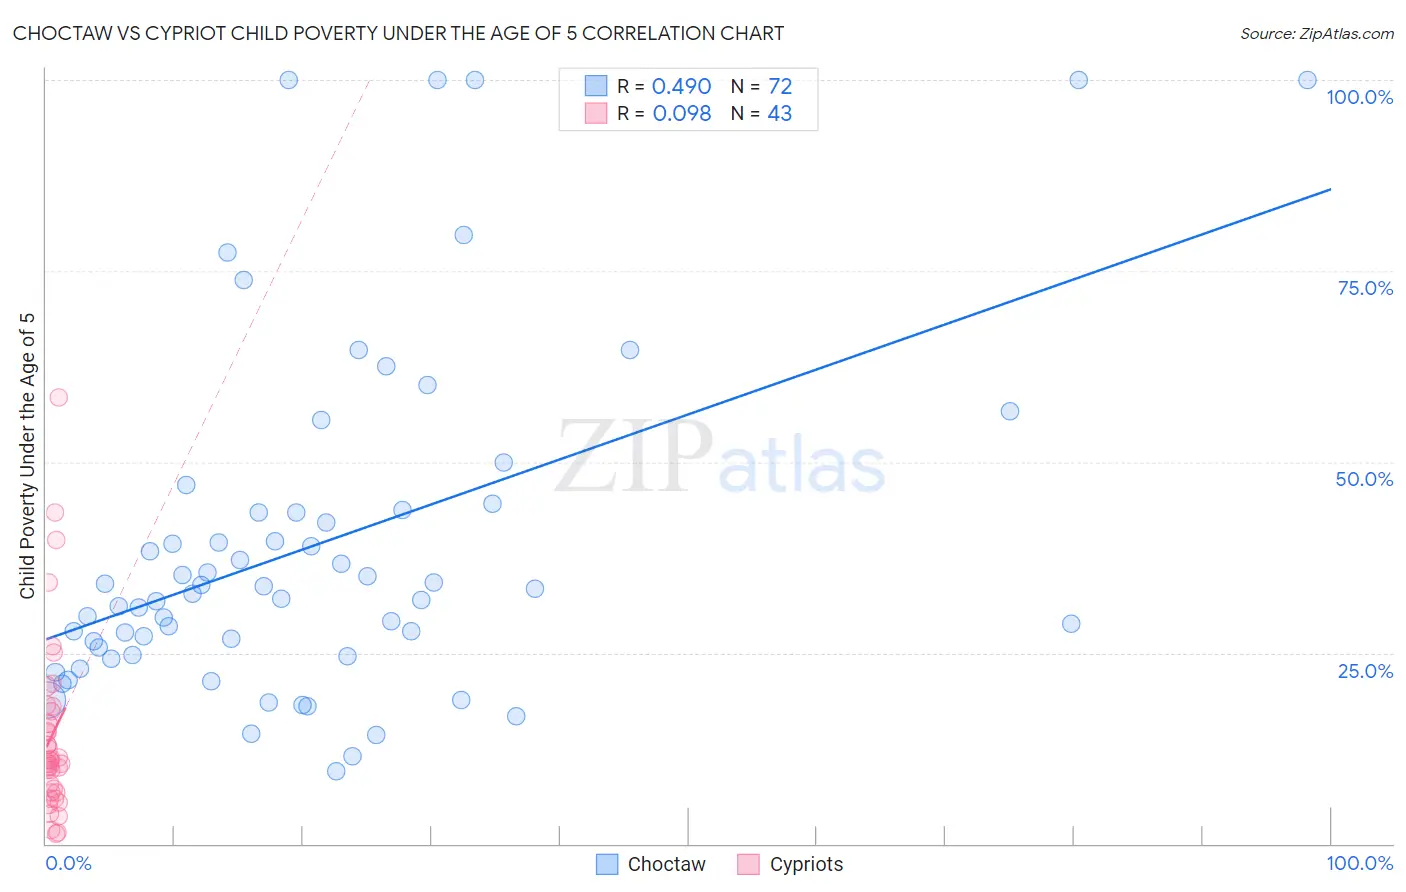 Choctaw vs Cypriot Child Poverty Under the Age of 5